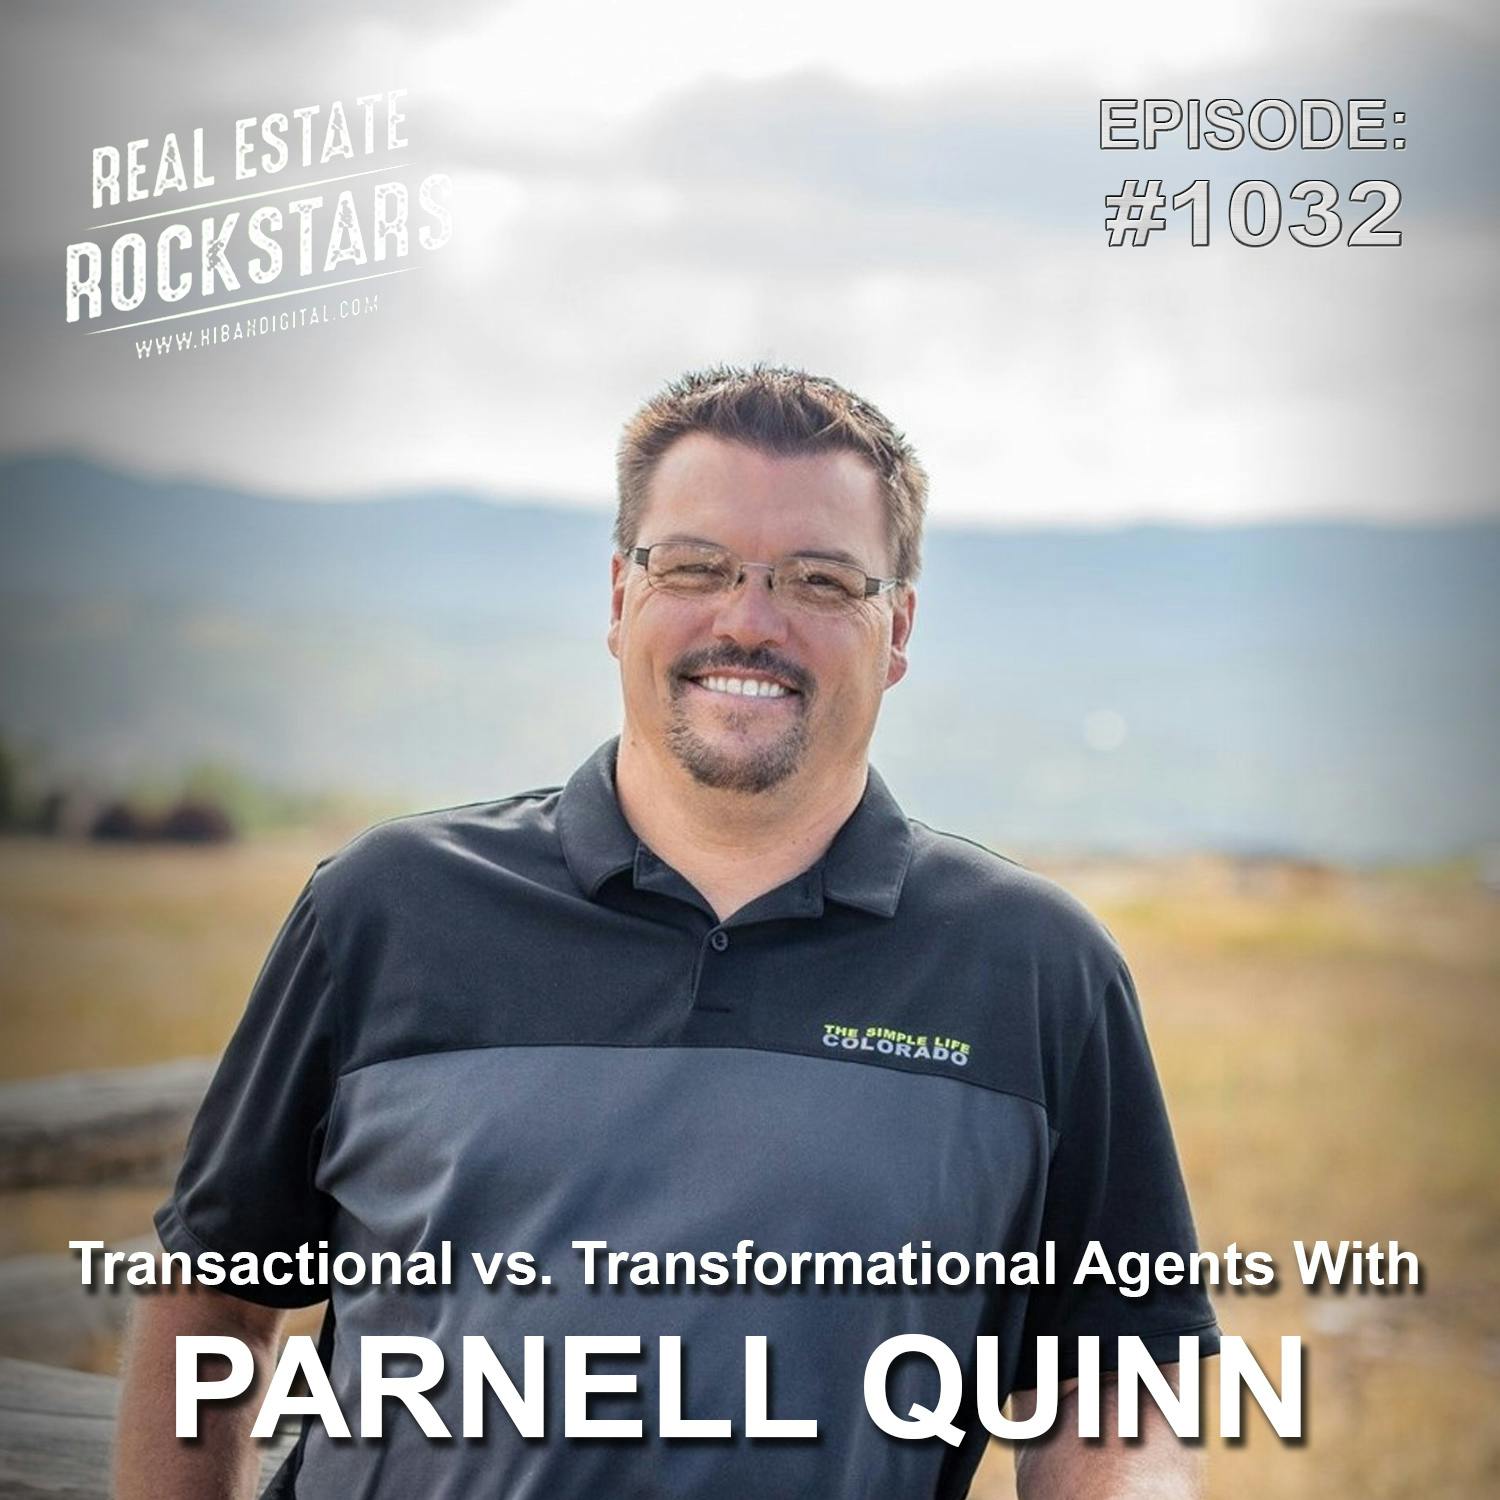 1032: Transactional vs. Transformational Agents With Parnell Quinn